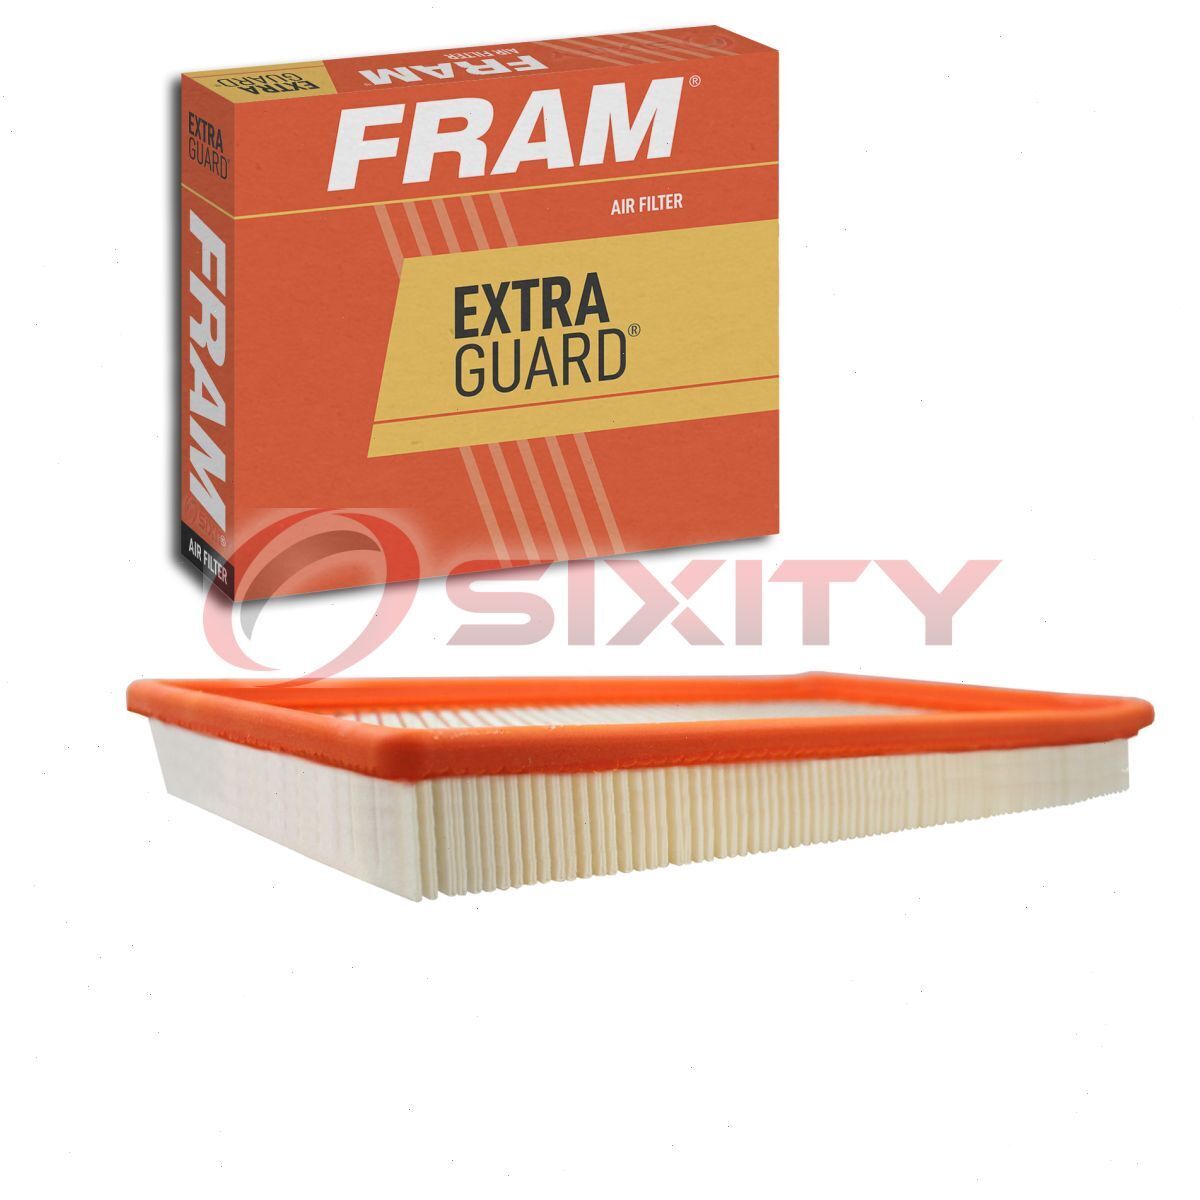 FRAM Extra Guard Air Filter for 1986-1997 Ford Aerostar Intake Inlet rd